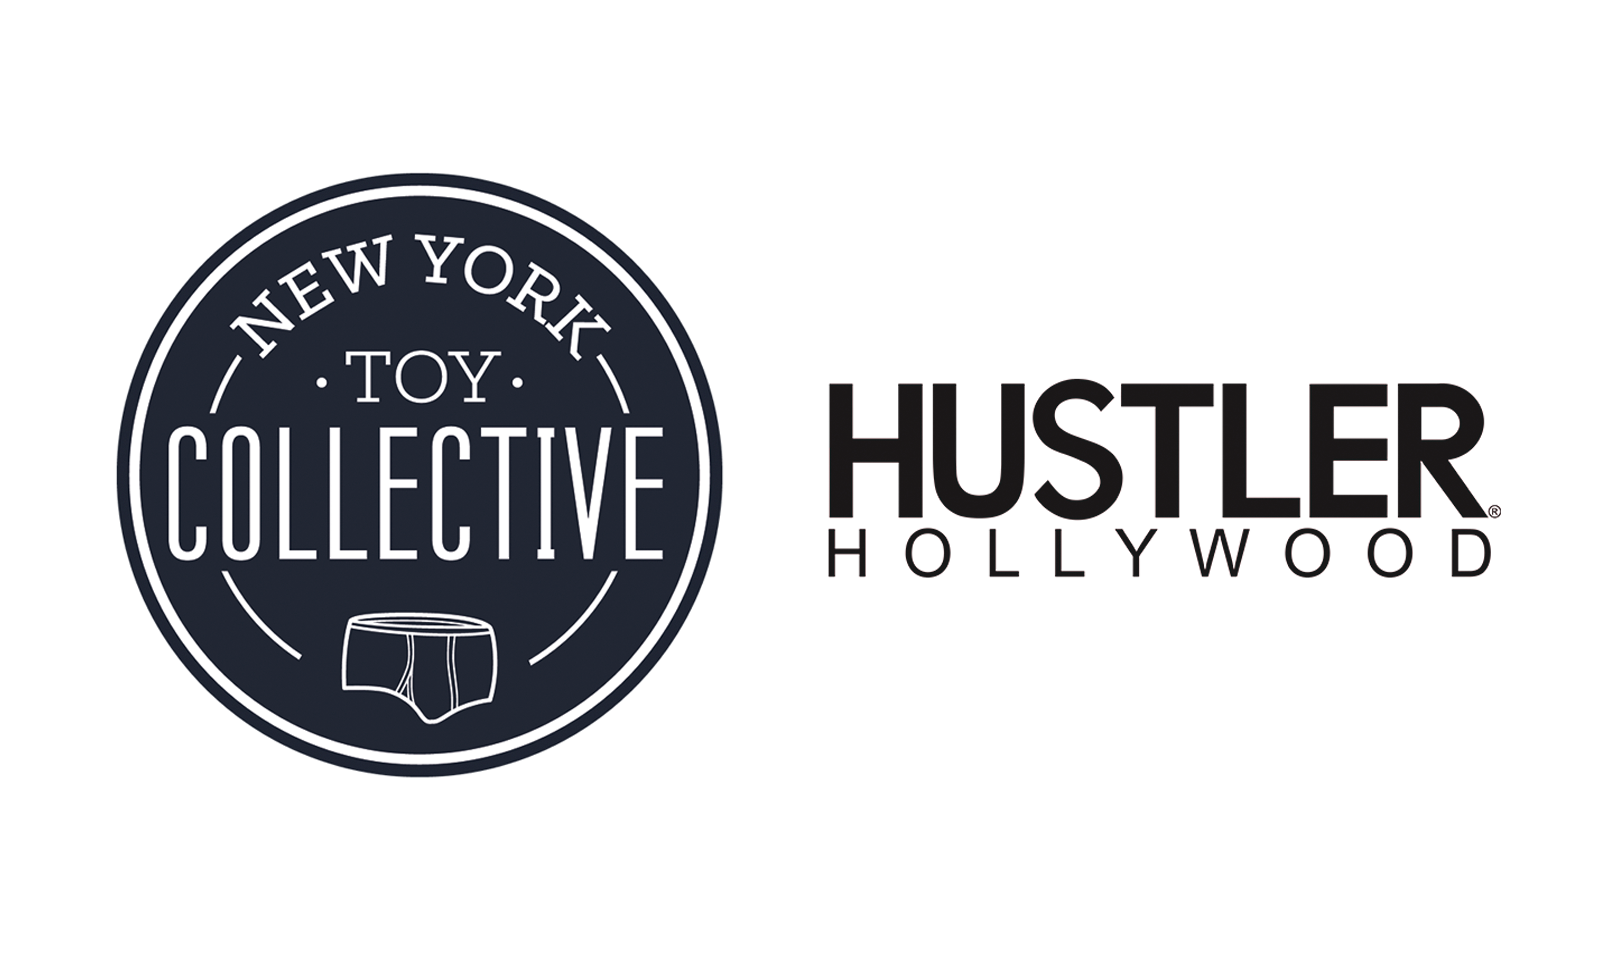 New York Toy Collective, Hustler Hollywood Ink Retail Pact